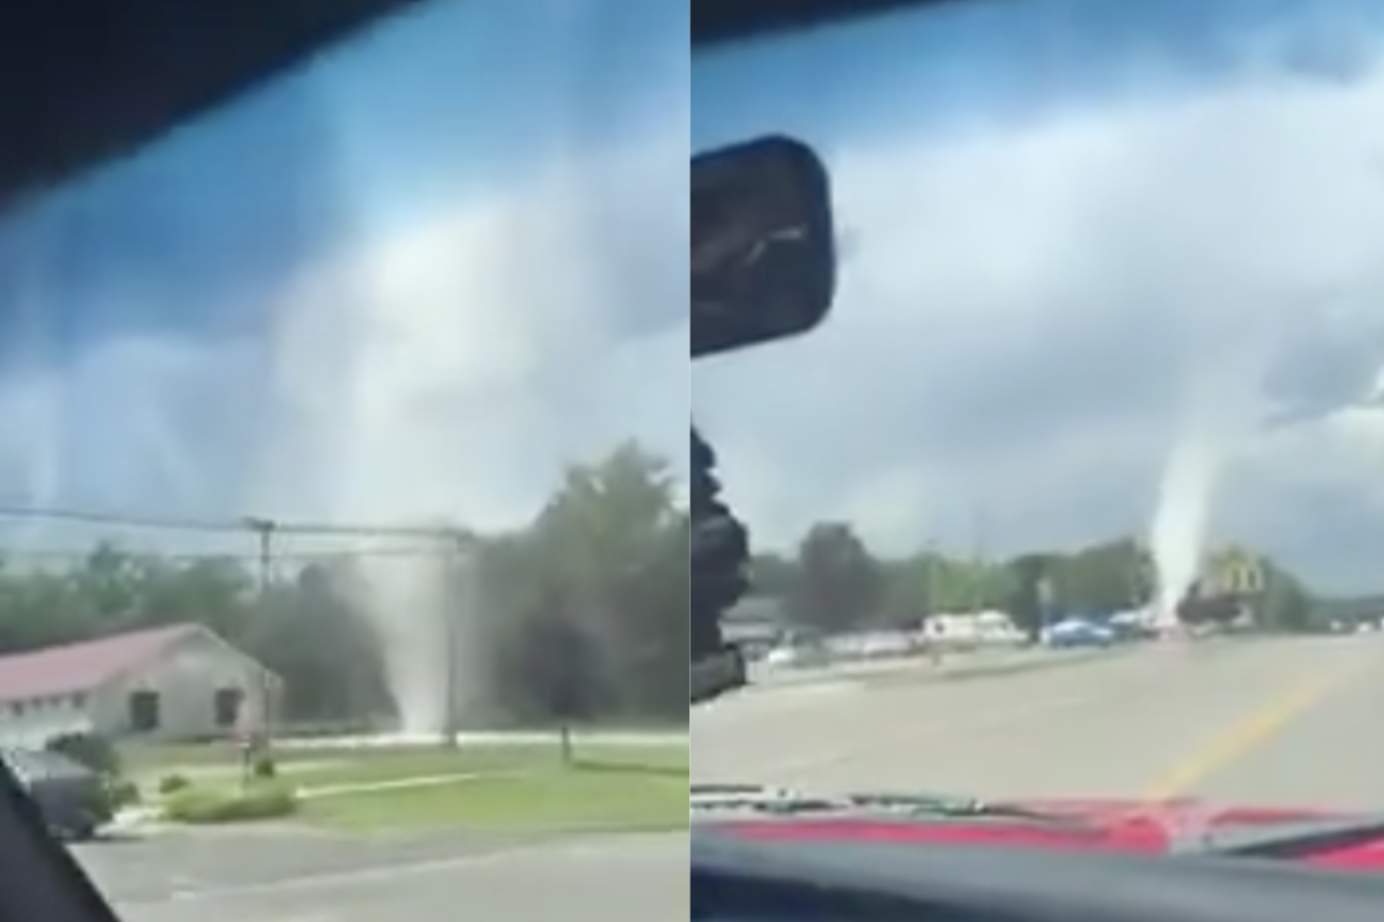 Video shows ‘dust devil’ whirling in Michigan